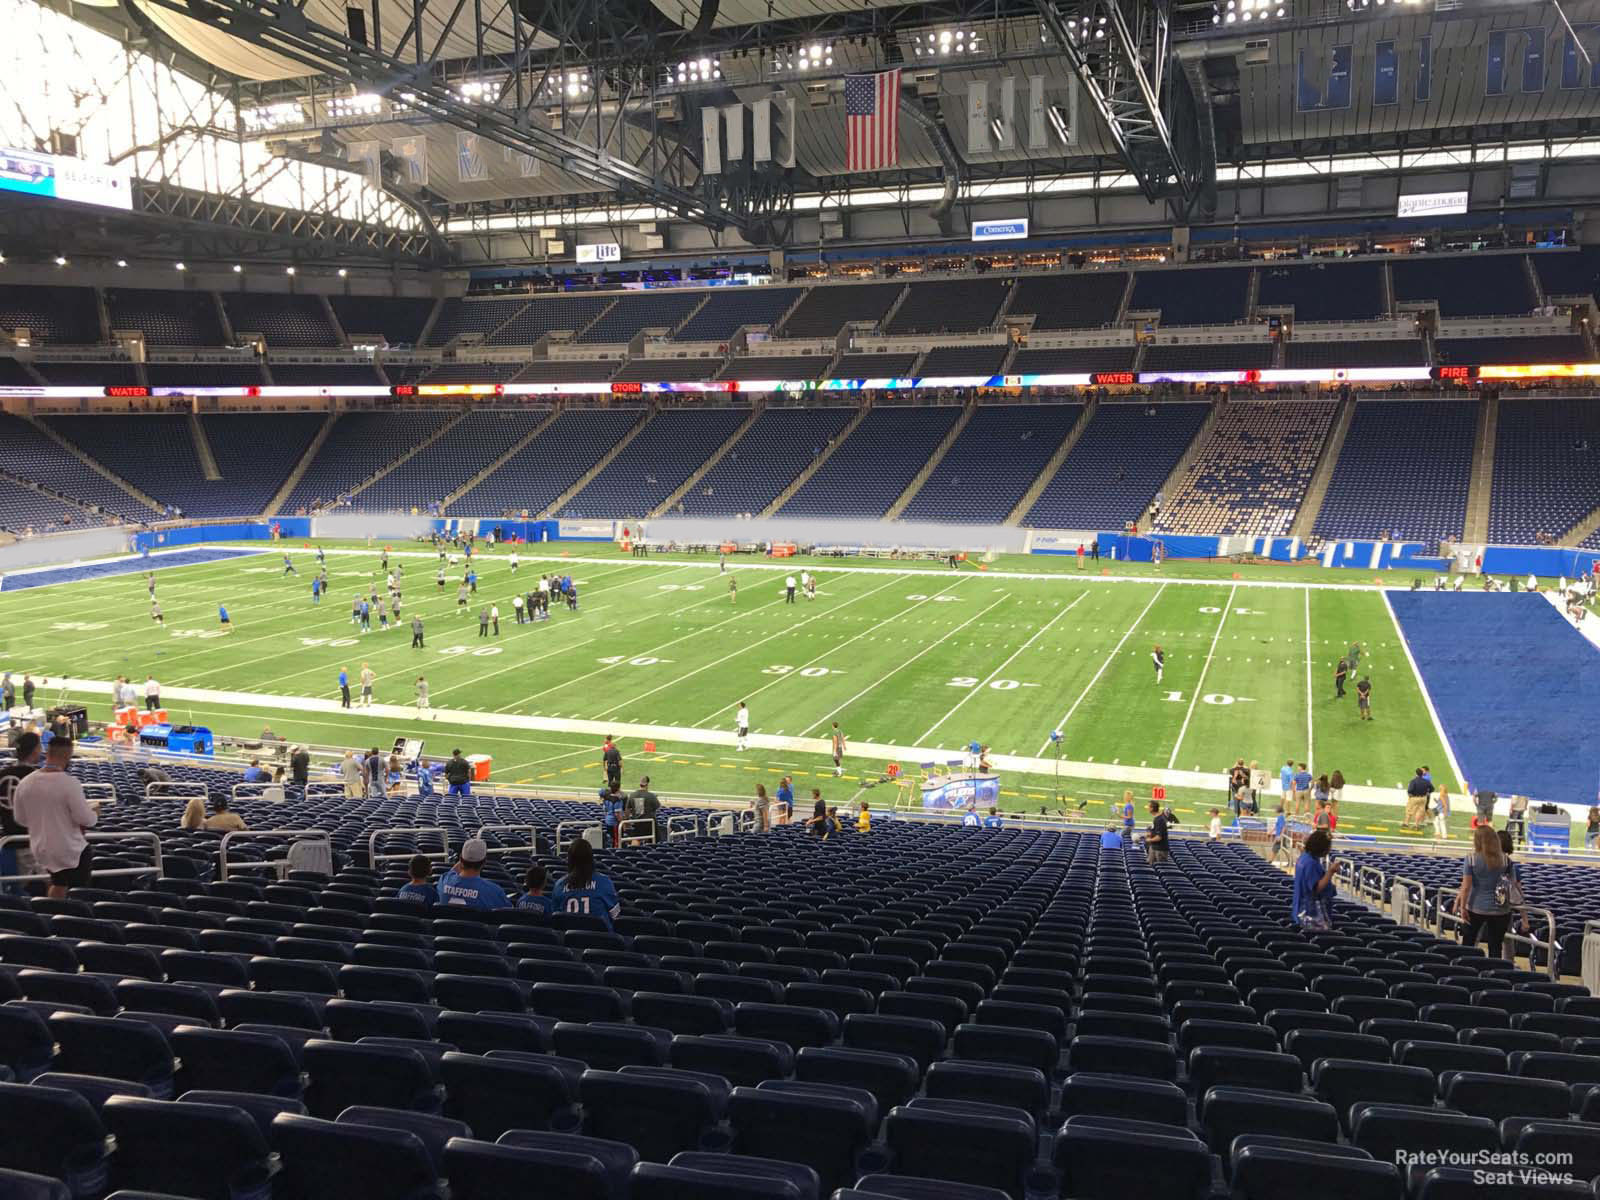 Section 109 at Ford Field 